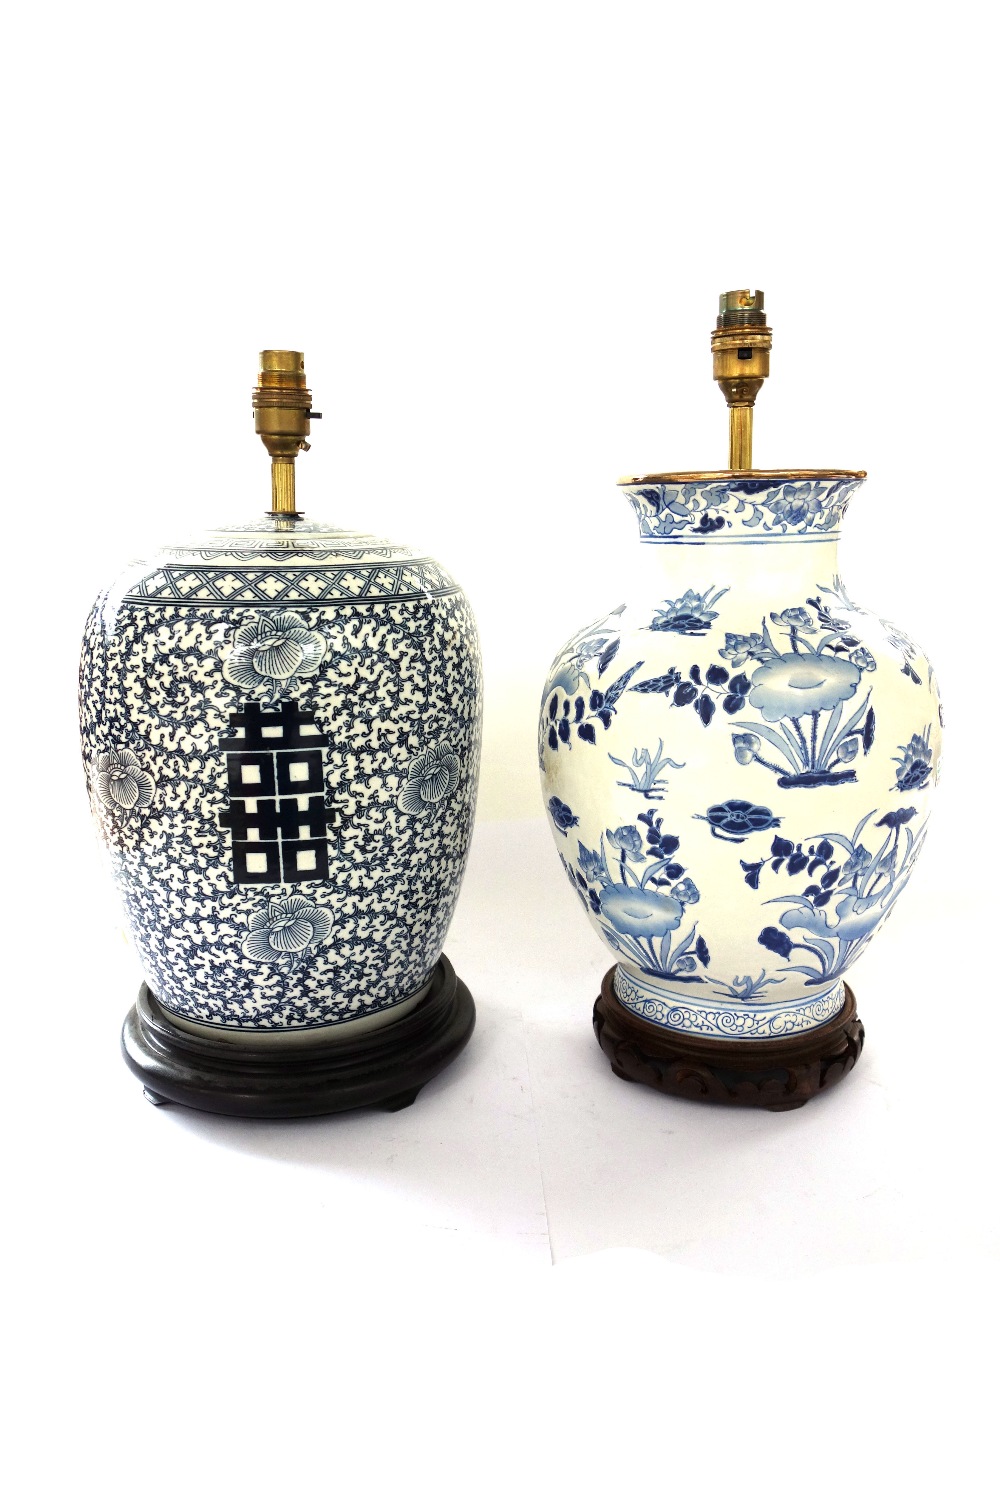 A set of four modern Chinese style pottery table lamps decorated with blue flowers against a white - Image 2 of 3